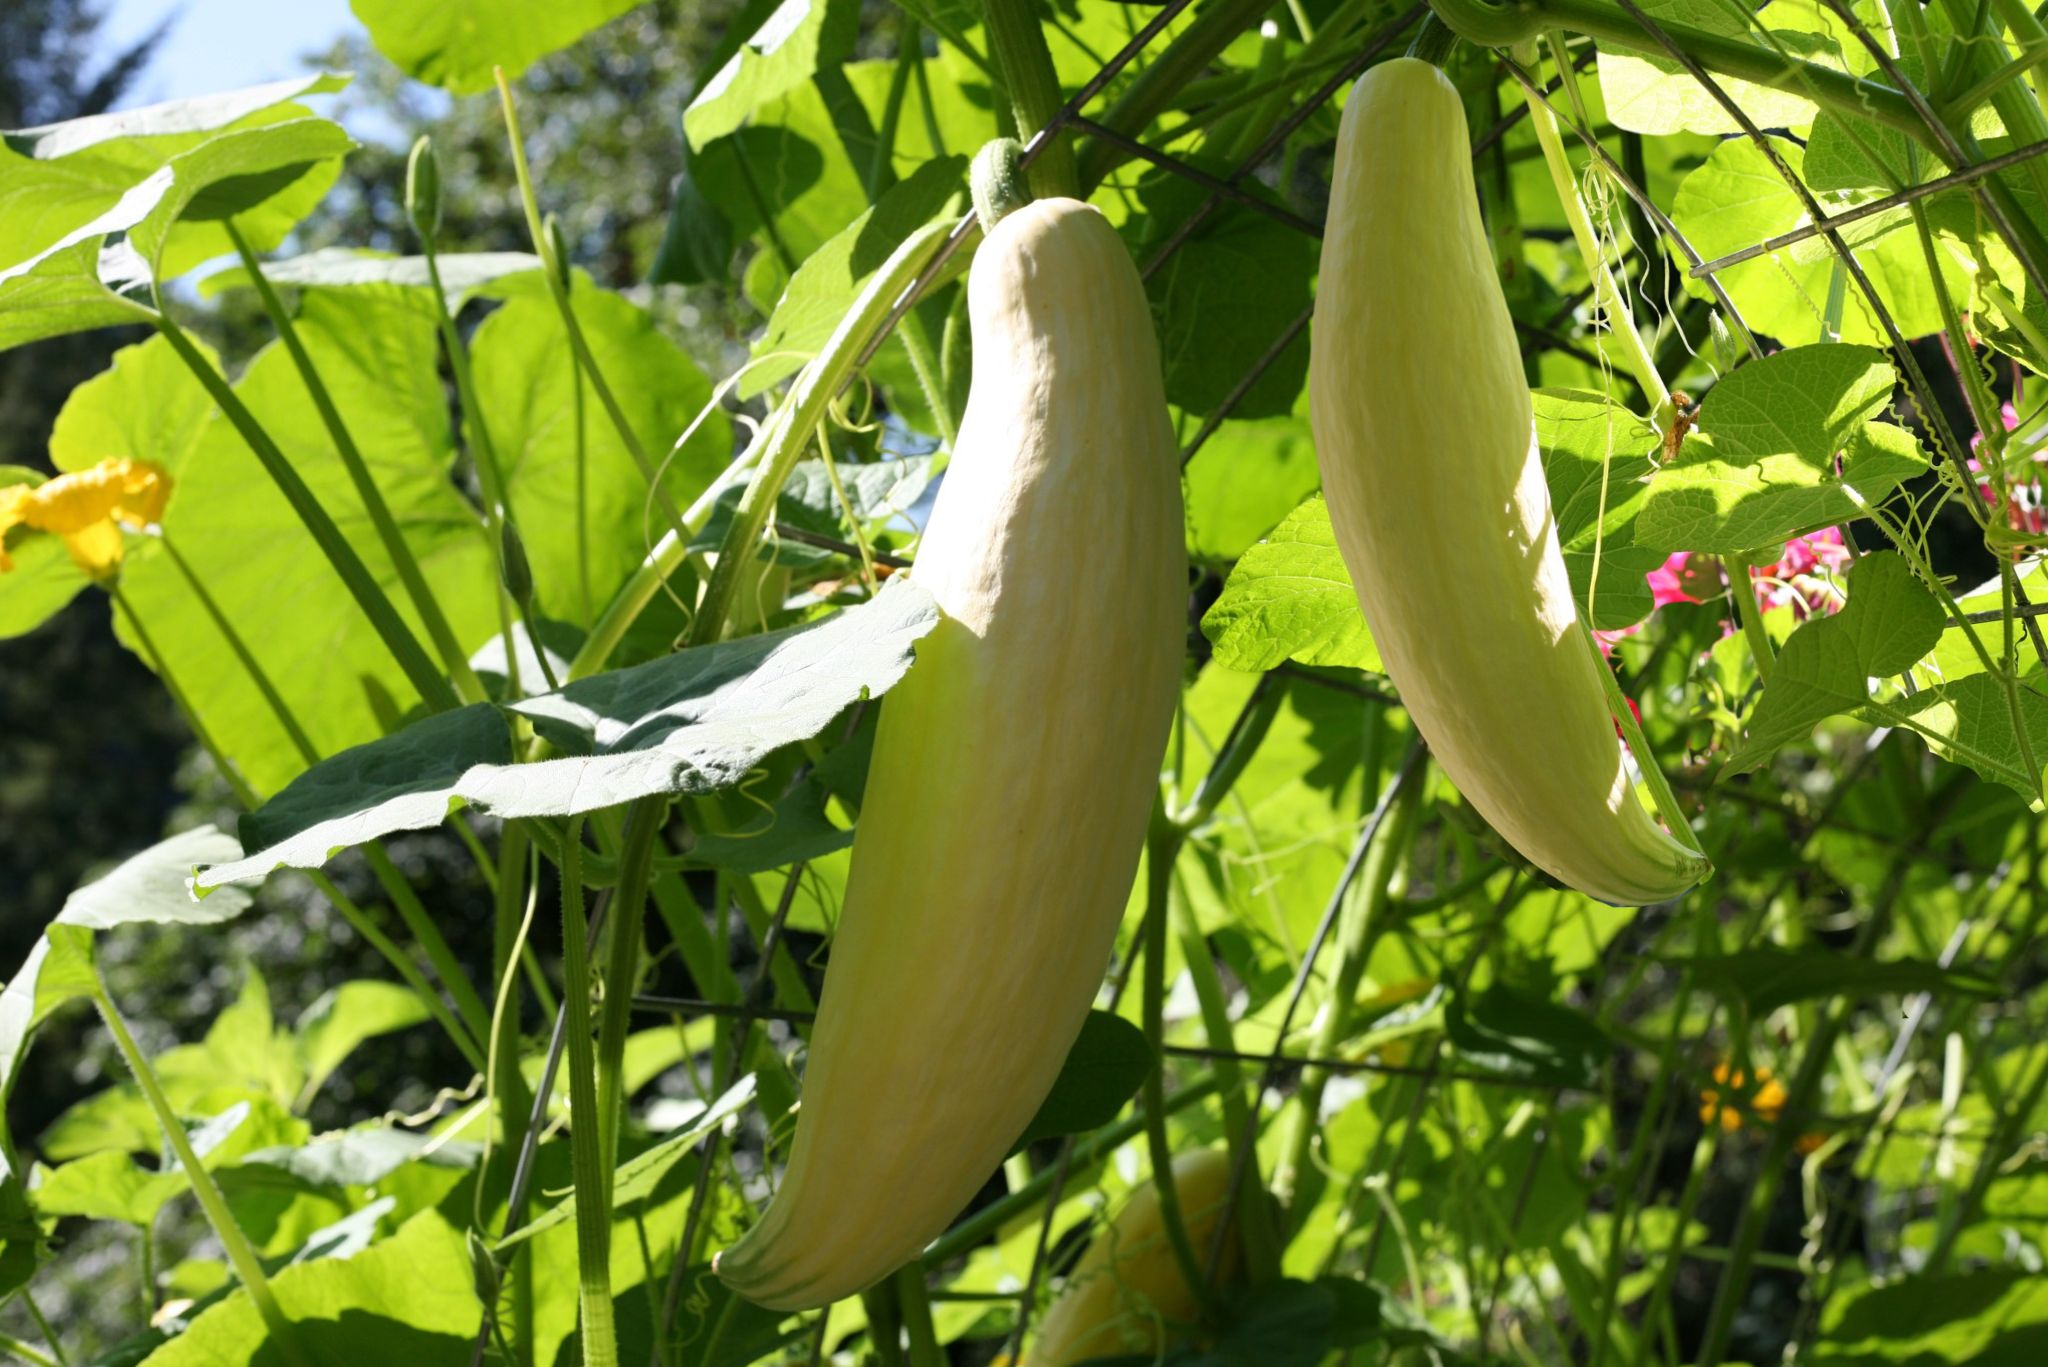 Two candy roaster squash on its plant